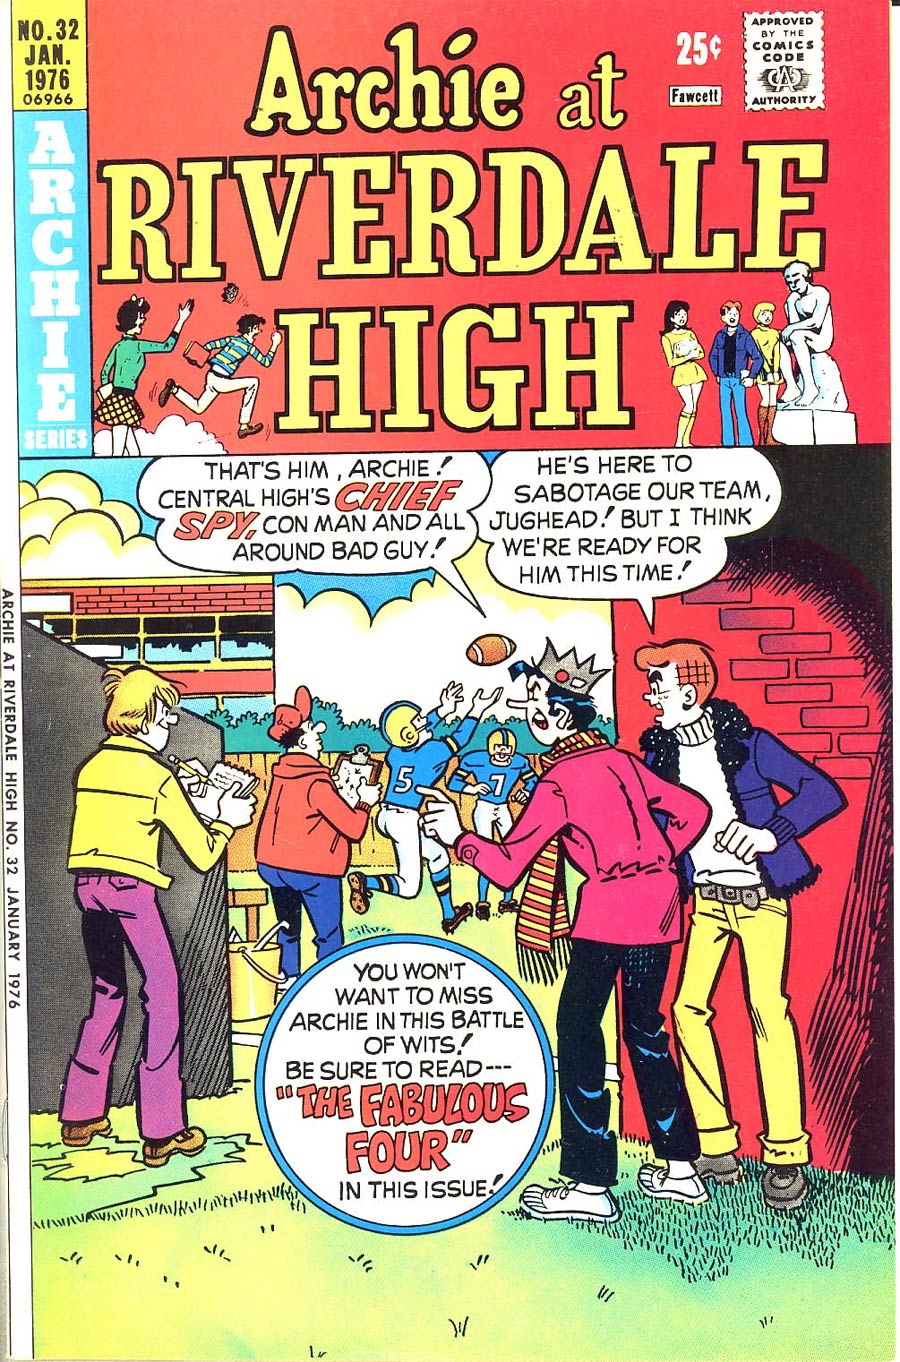 Archie At Riverdale High #32